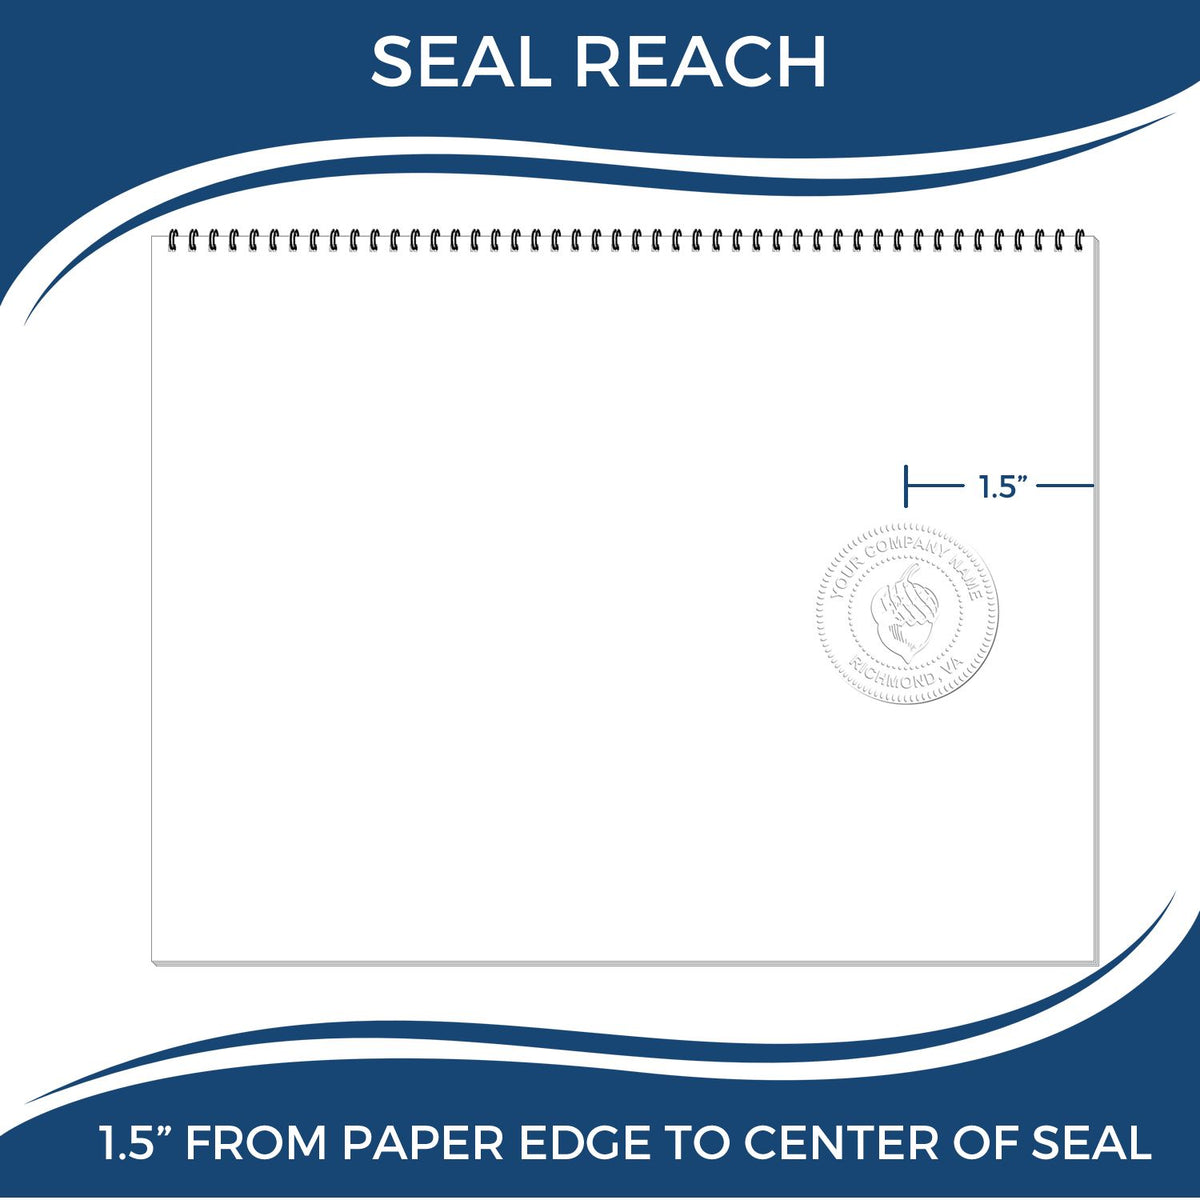 An infographic showing the seal reach which is represented by a ruler and a miniature seal image of the Gift North Carolina Land Surveyor Seal